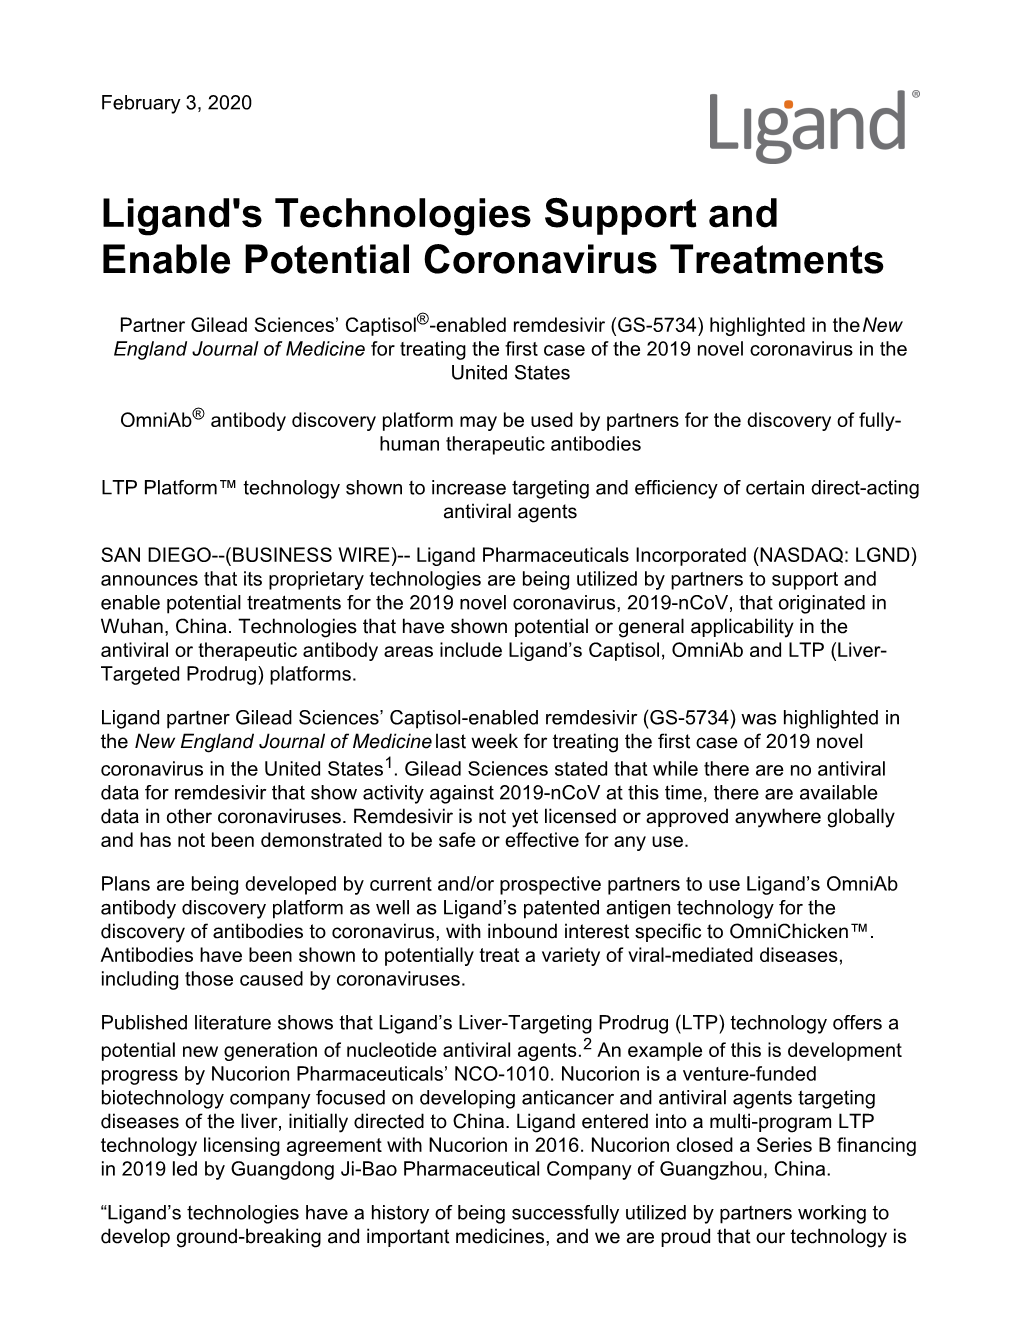 Ligand's Technologies Support and Enable Potential Coronavirus Treatments